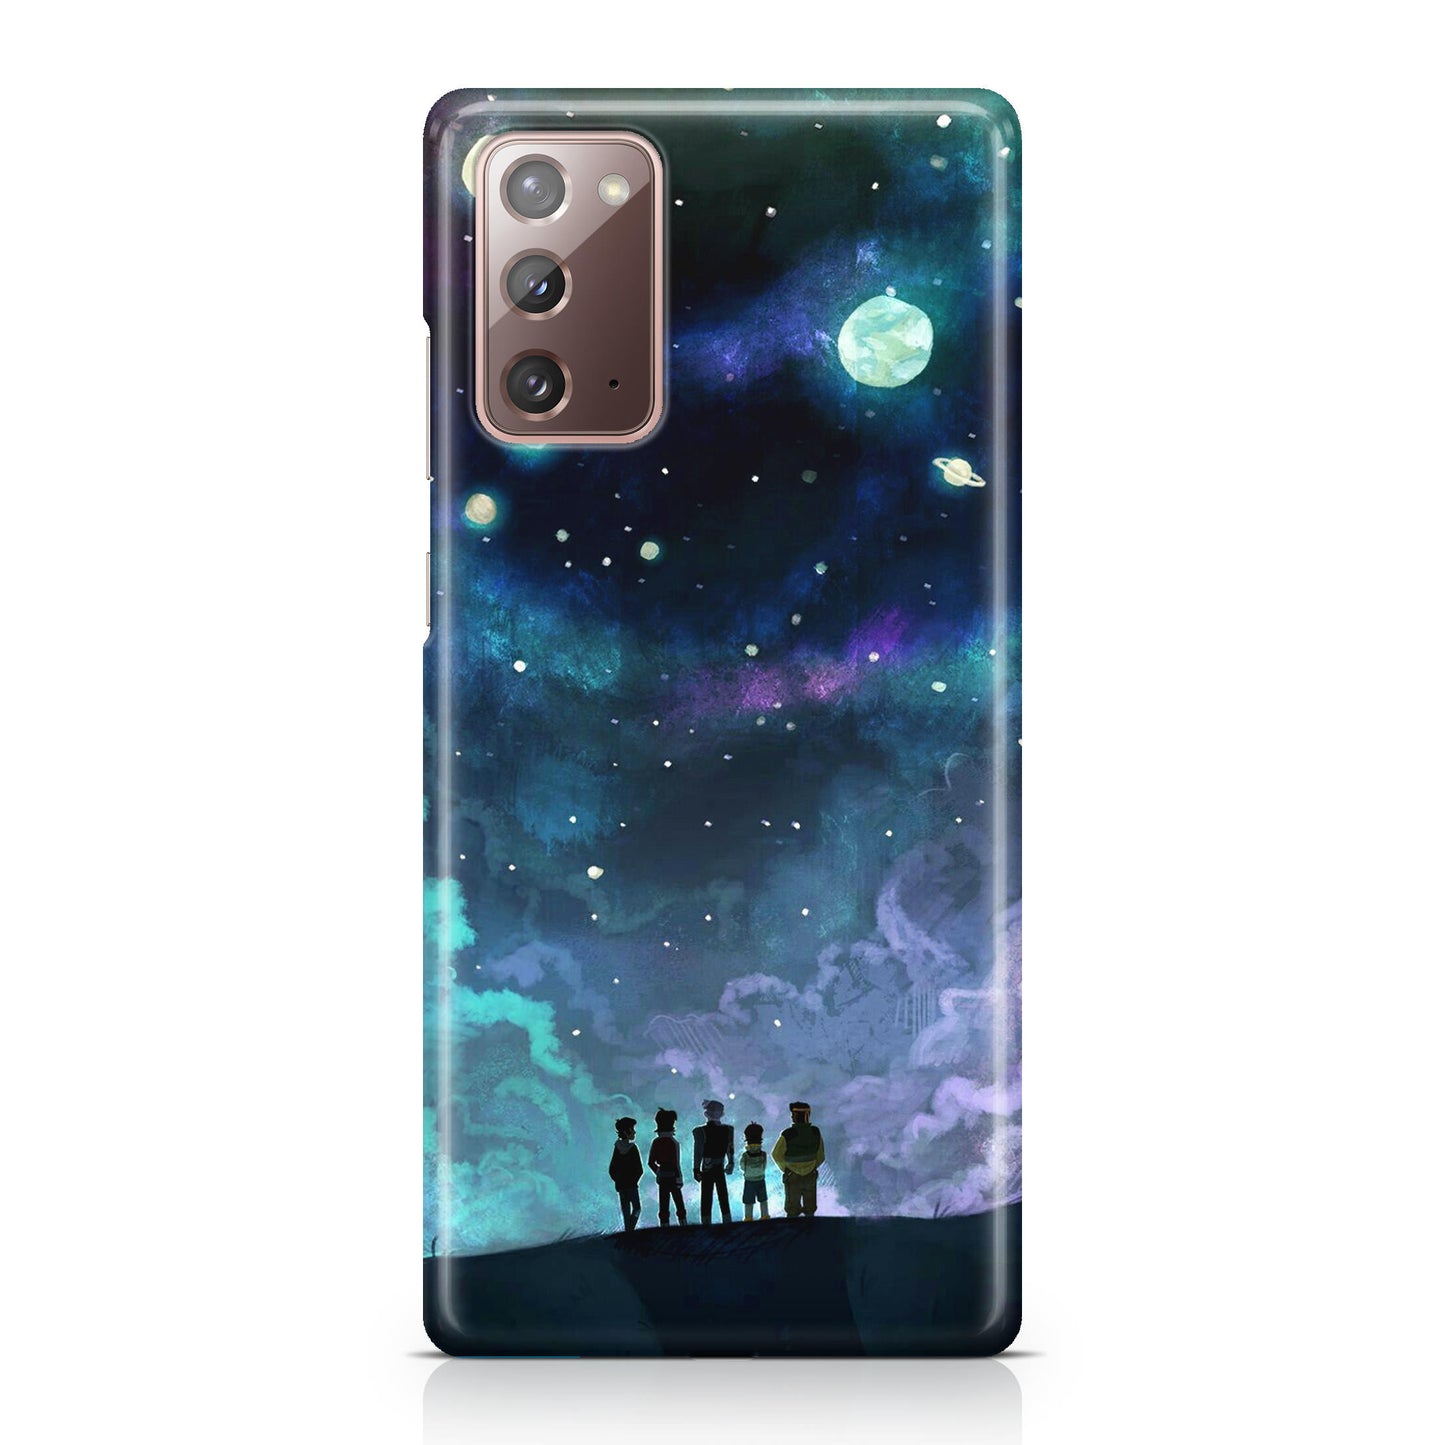 Voltron In Space Nebula Galaxy Note 20 Case